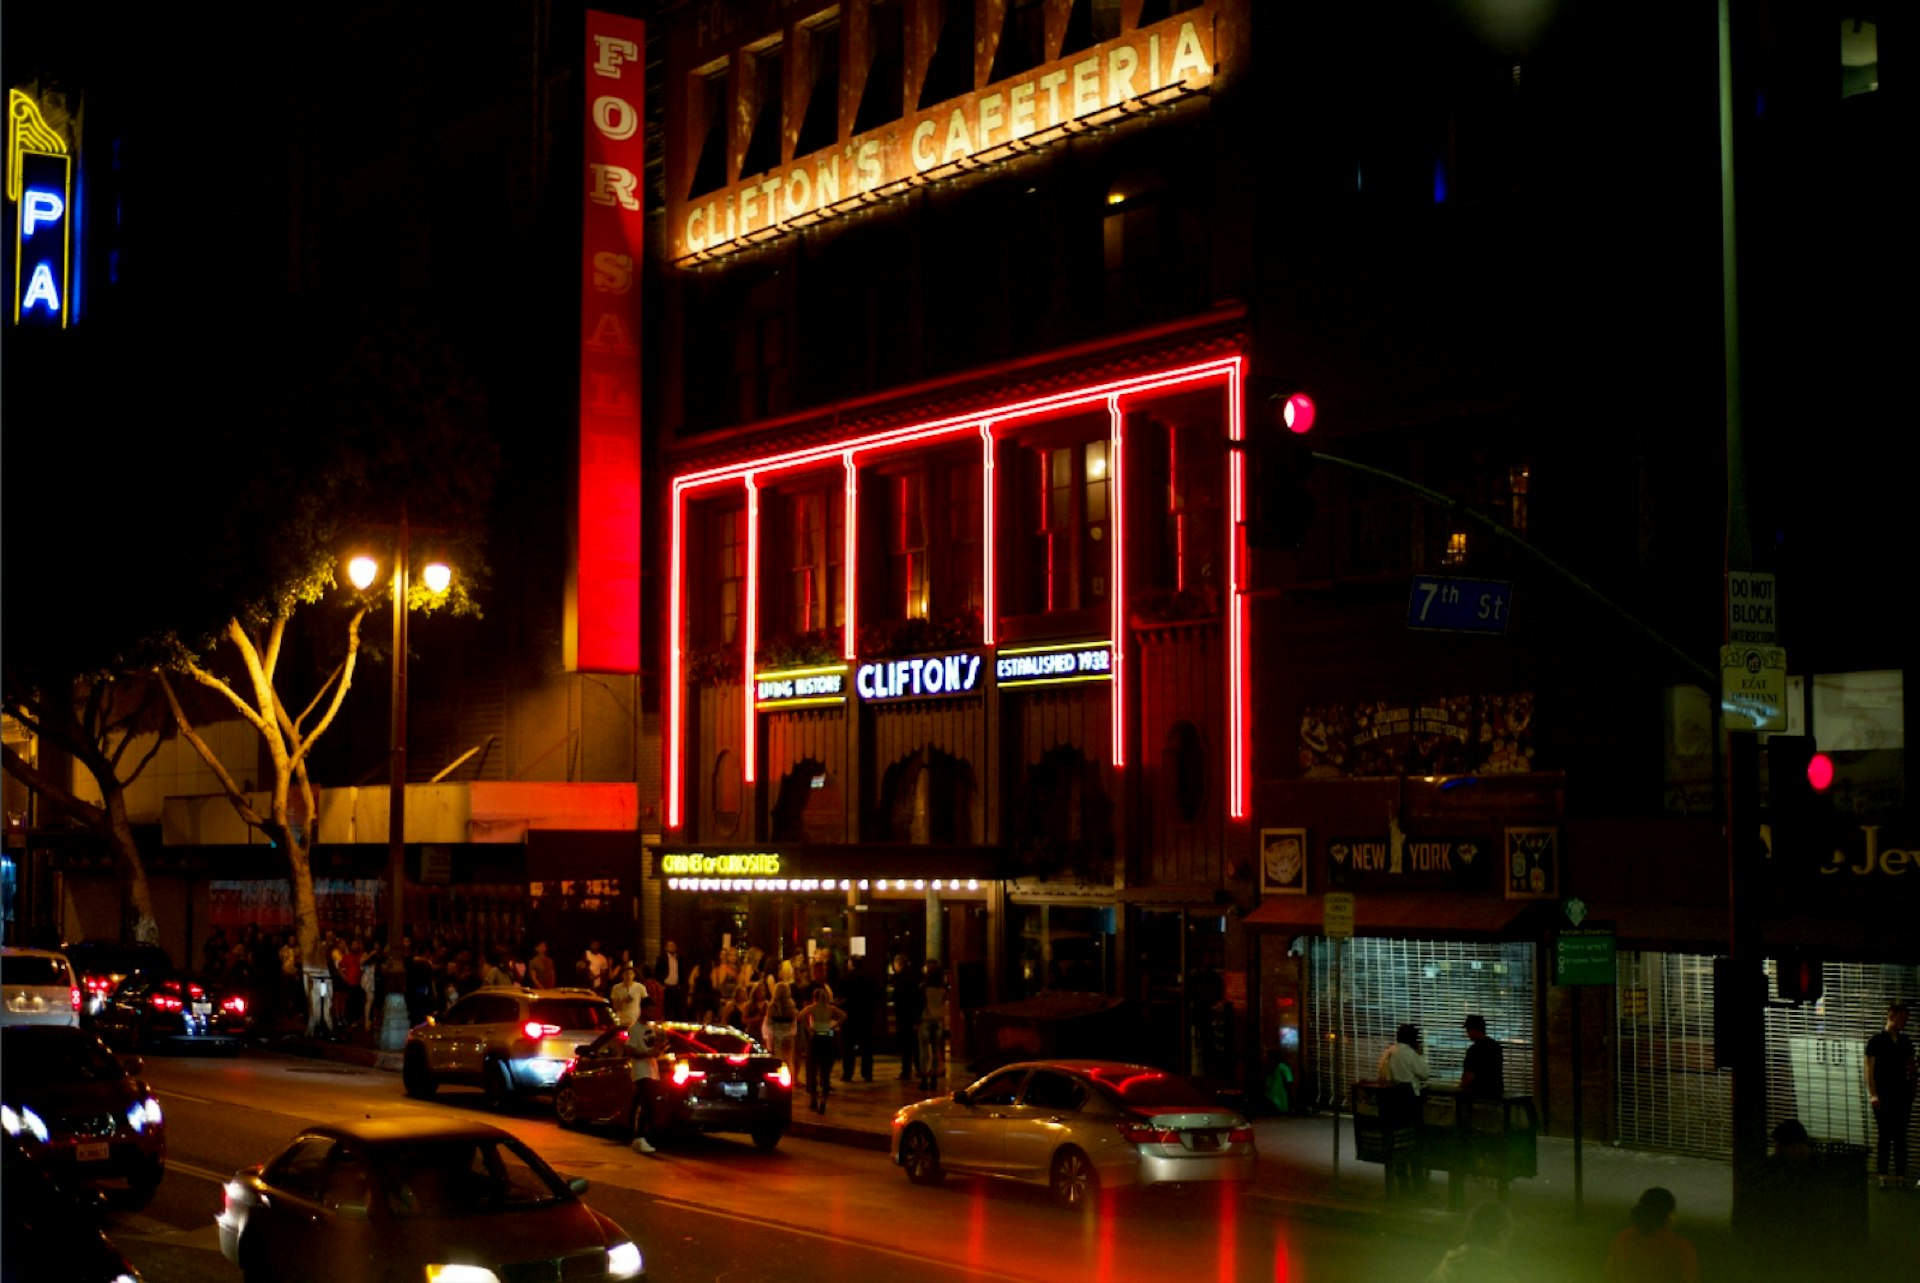 The facade of Clifton's Cafeteria, a multi-story Los Angeles landmark, is covered in neon lights; Los Angeles neon